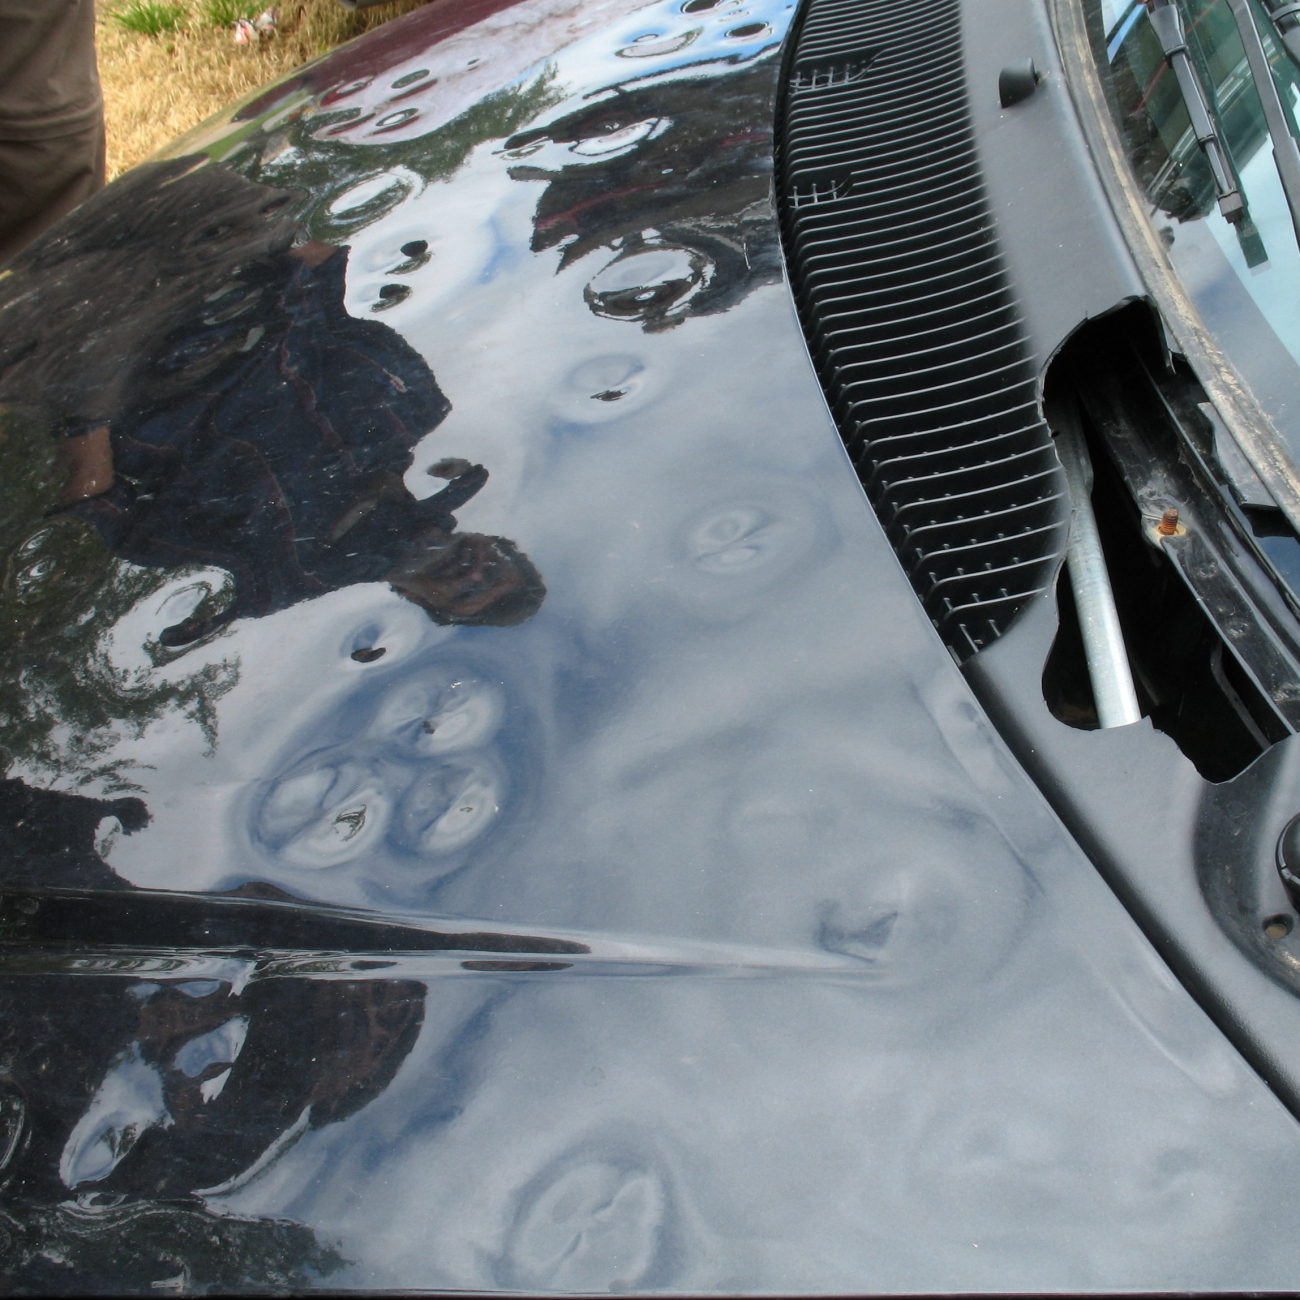 Hail damage to vehicles is part of the routine